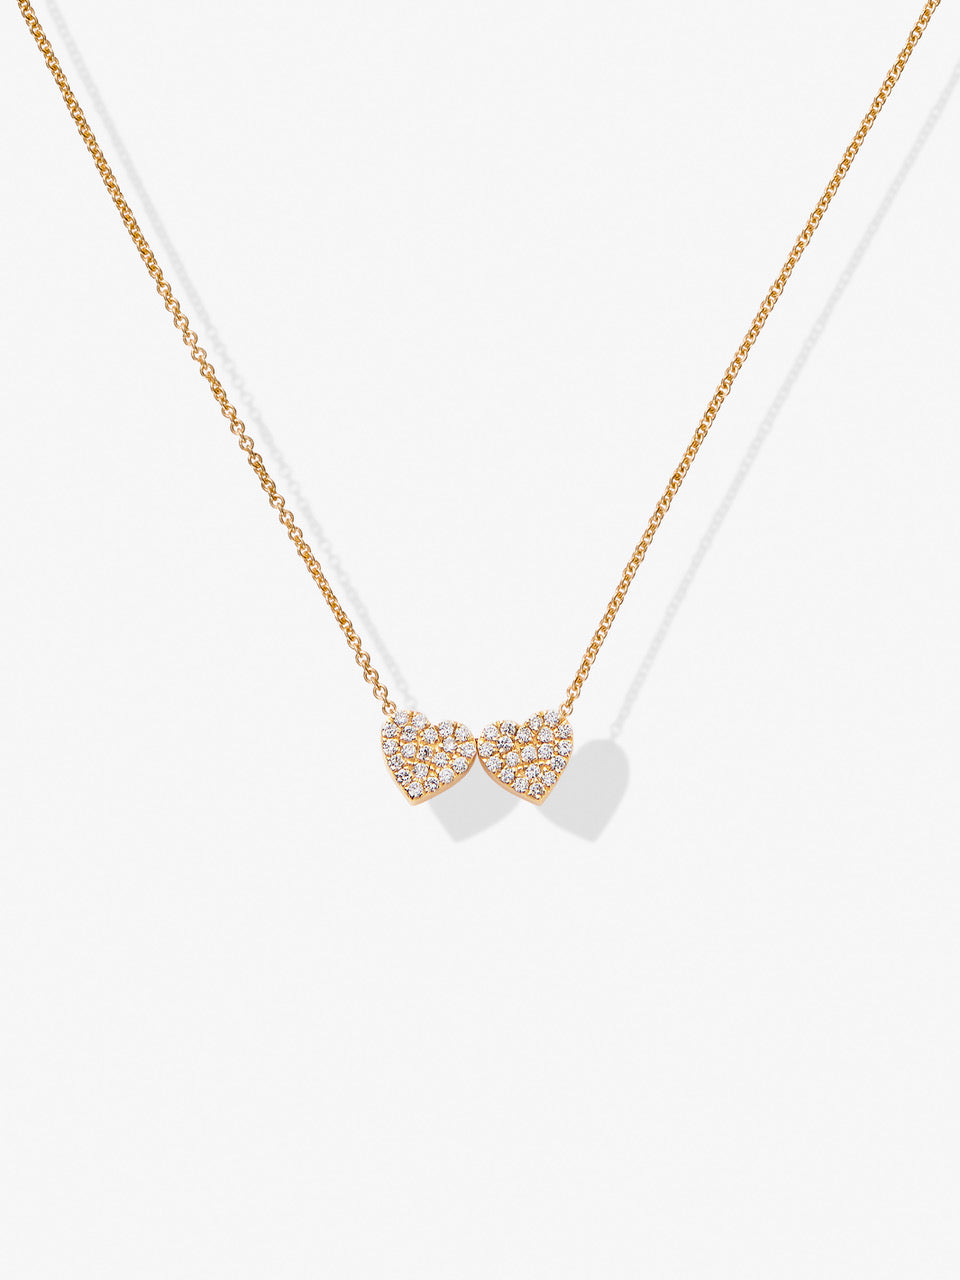 Diamond Hearts Necklace in 18k Gold